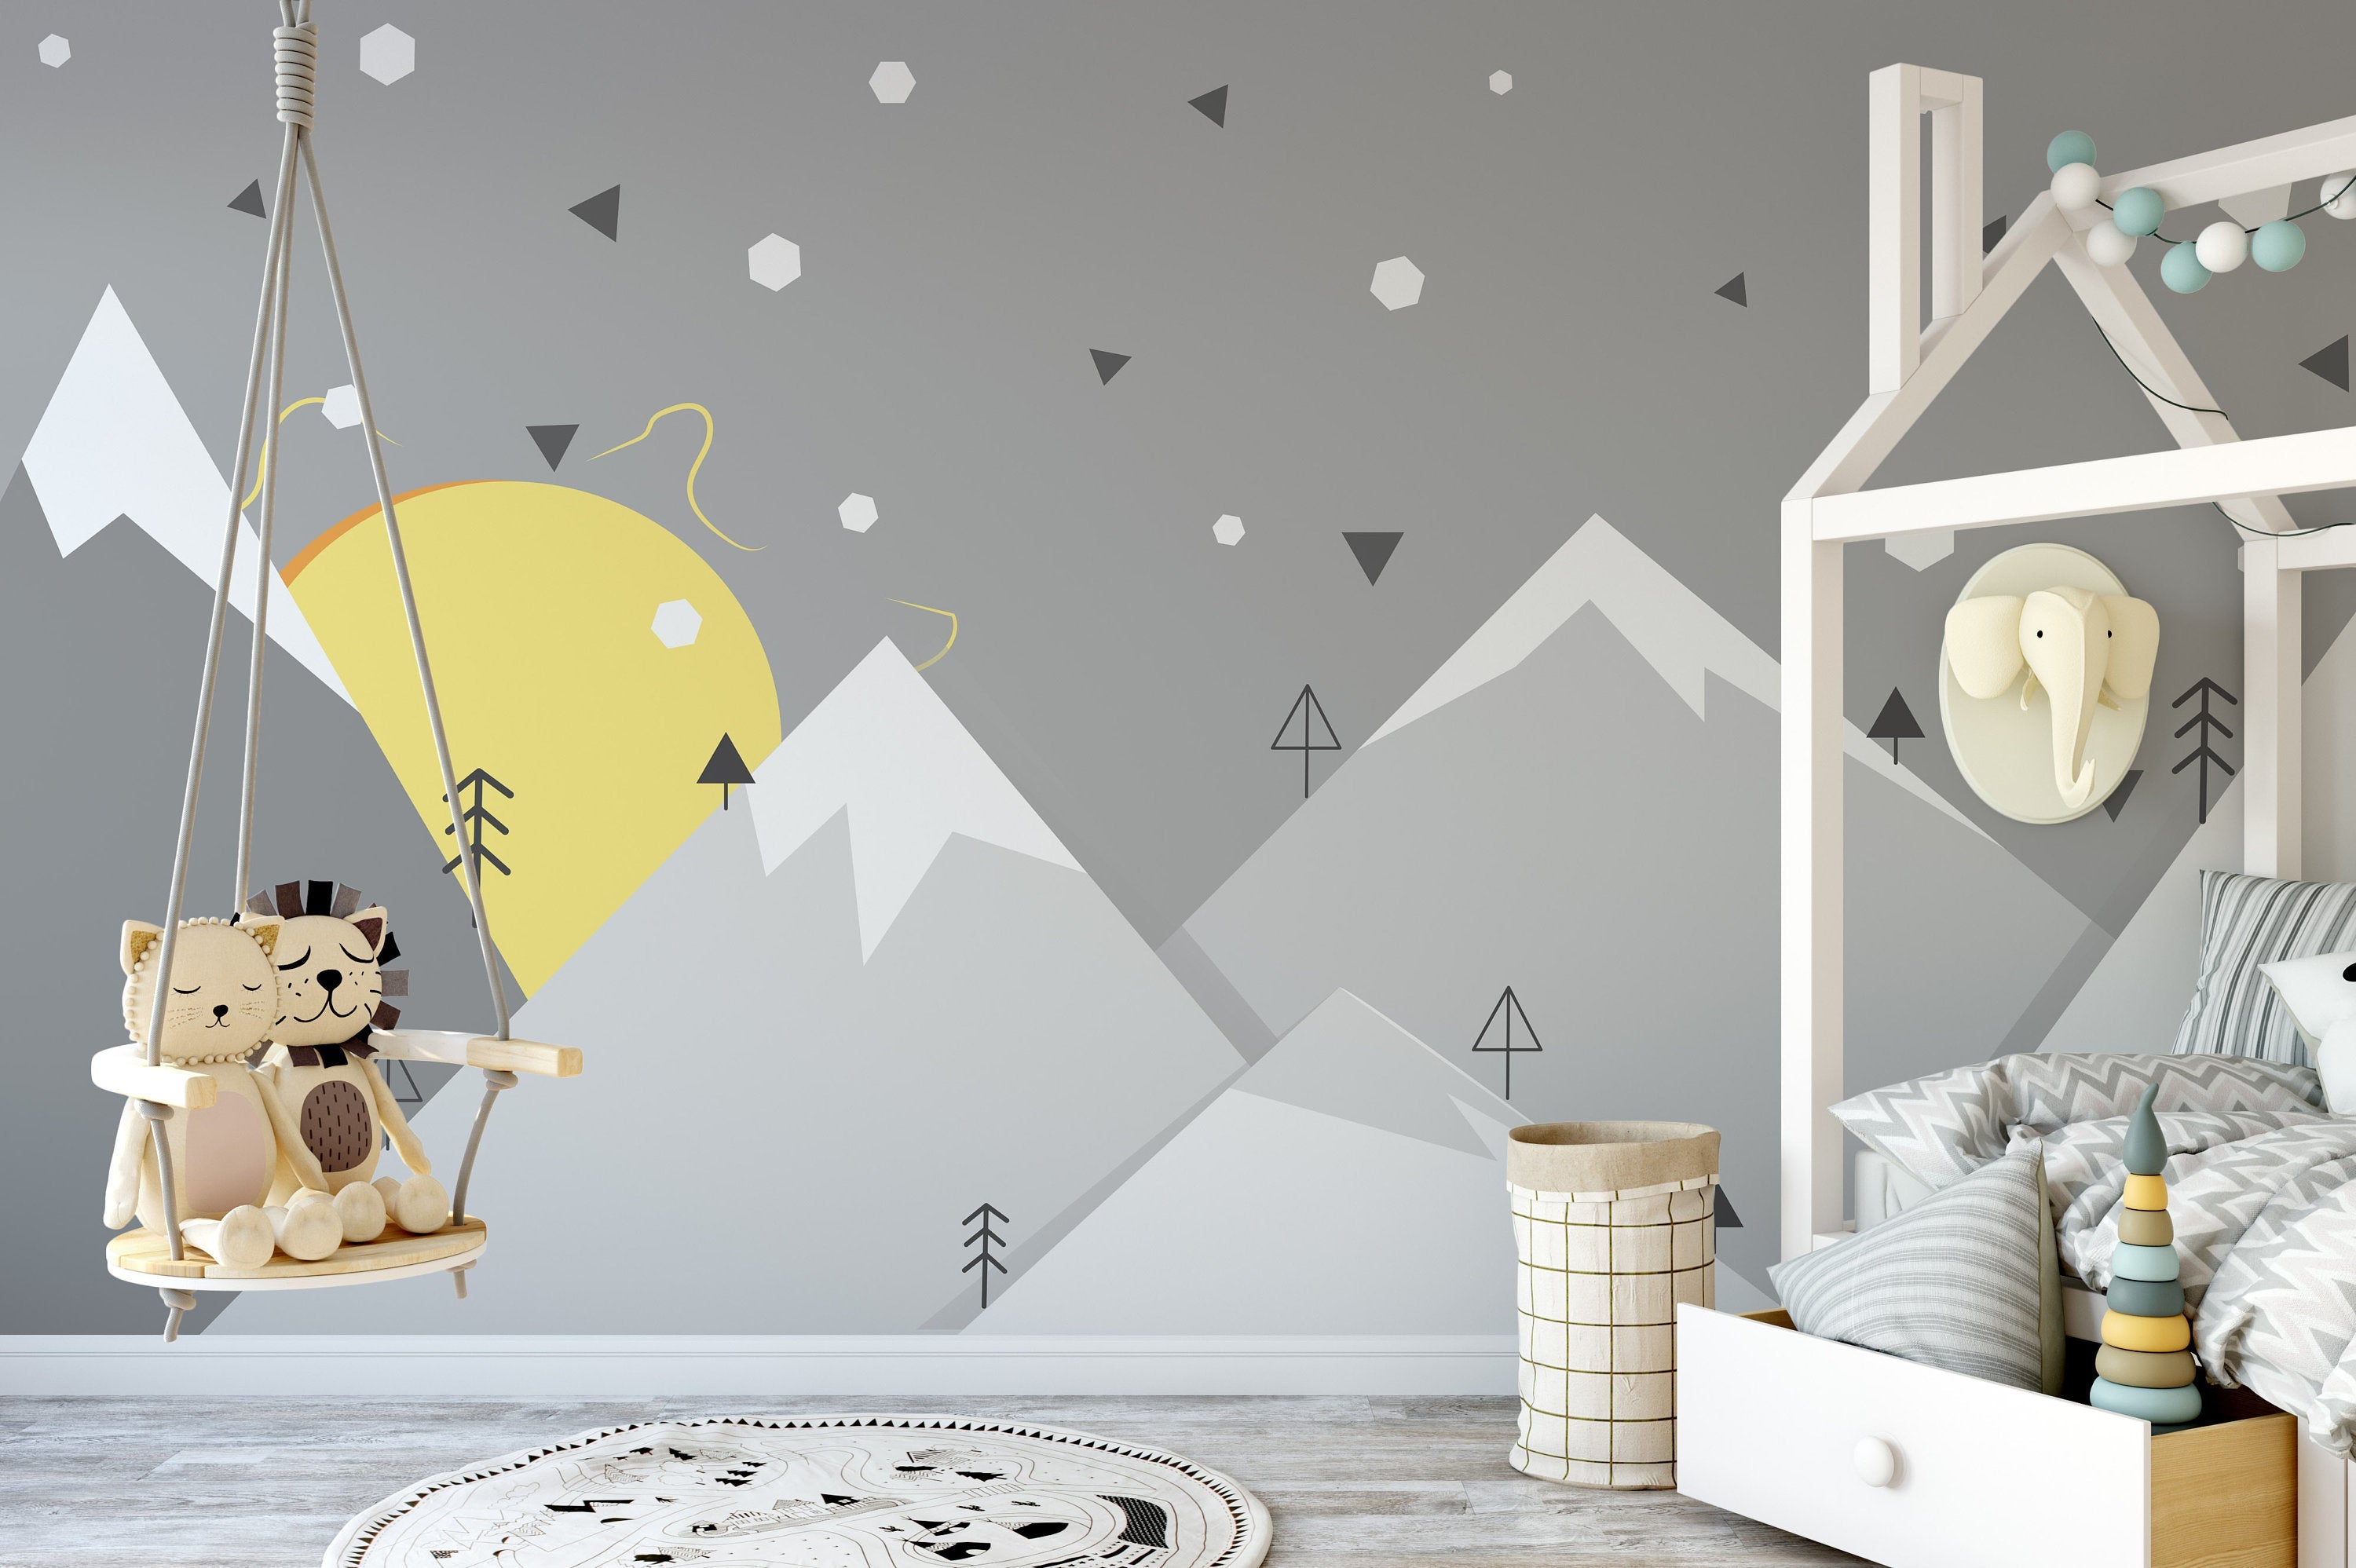 Winter Landscape with Mountains and the Sun Geometric Shapes Wallpaper Children Kids Room Wall Decor Mural Art